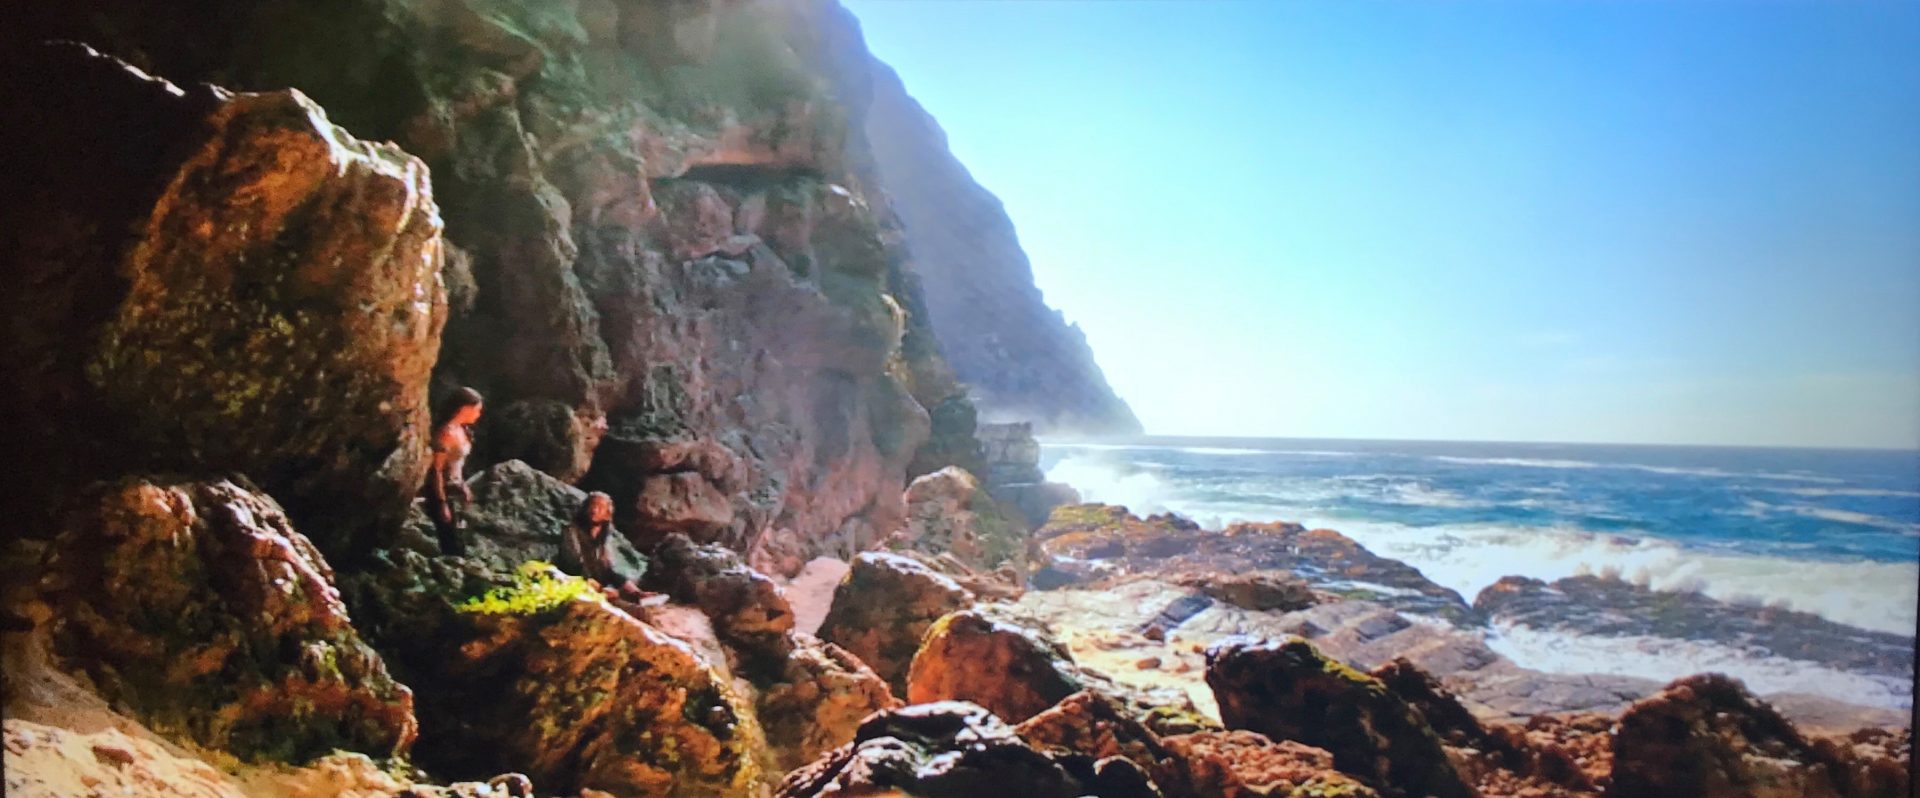 A scene from the Tomb Raider movie where Lara Croft is on a beach looking out over the sea